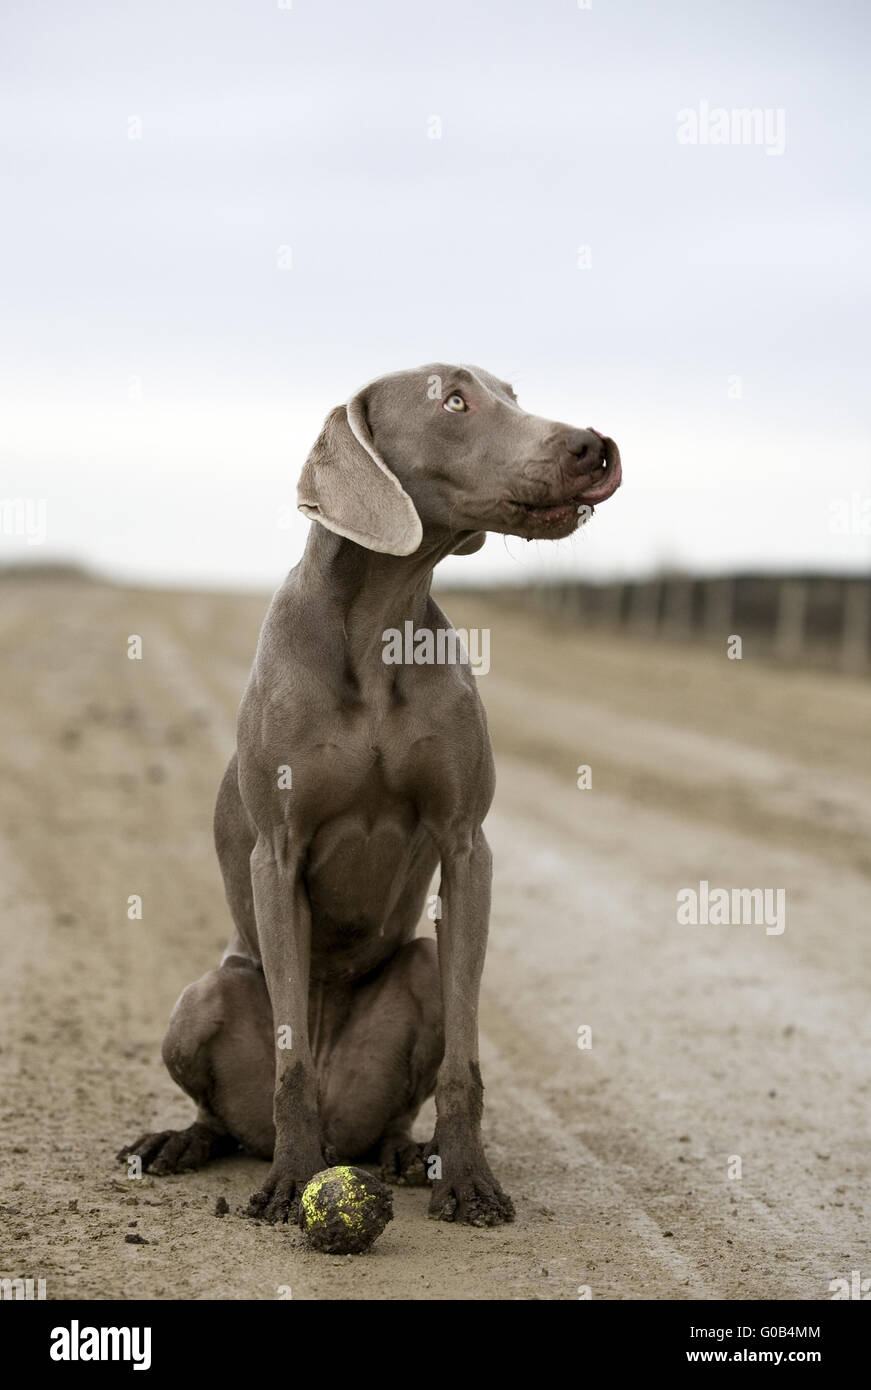 weimaraner dog plays with a ball in mud Stock Photo